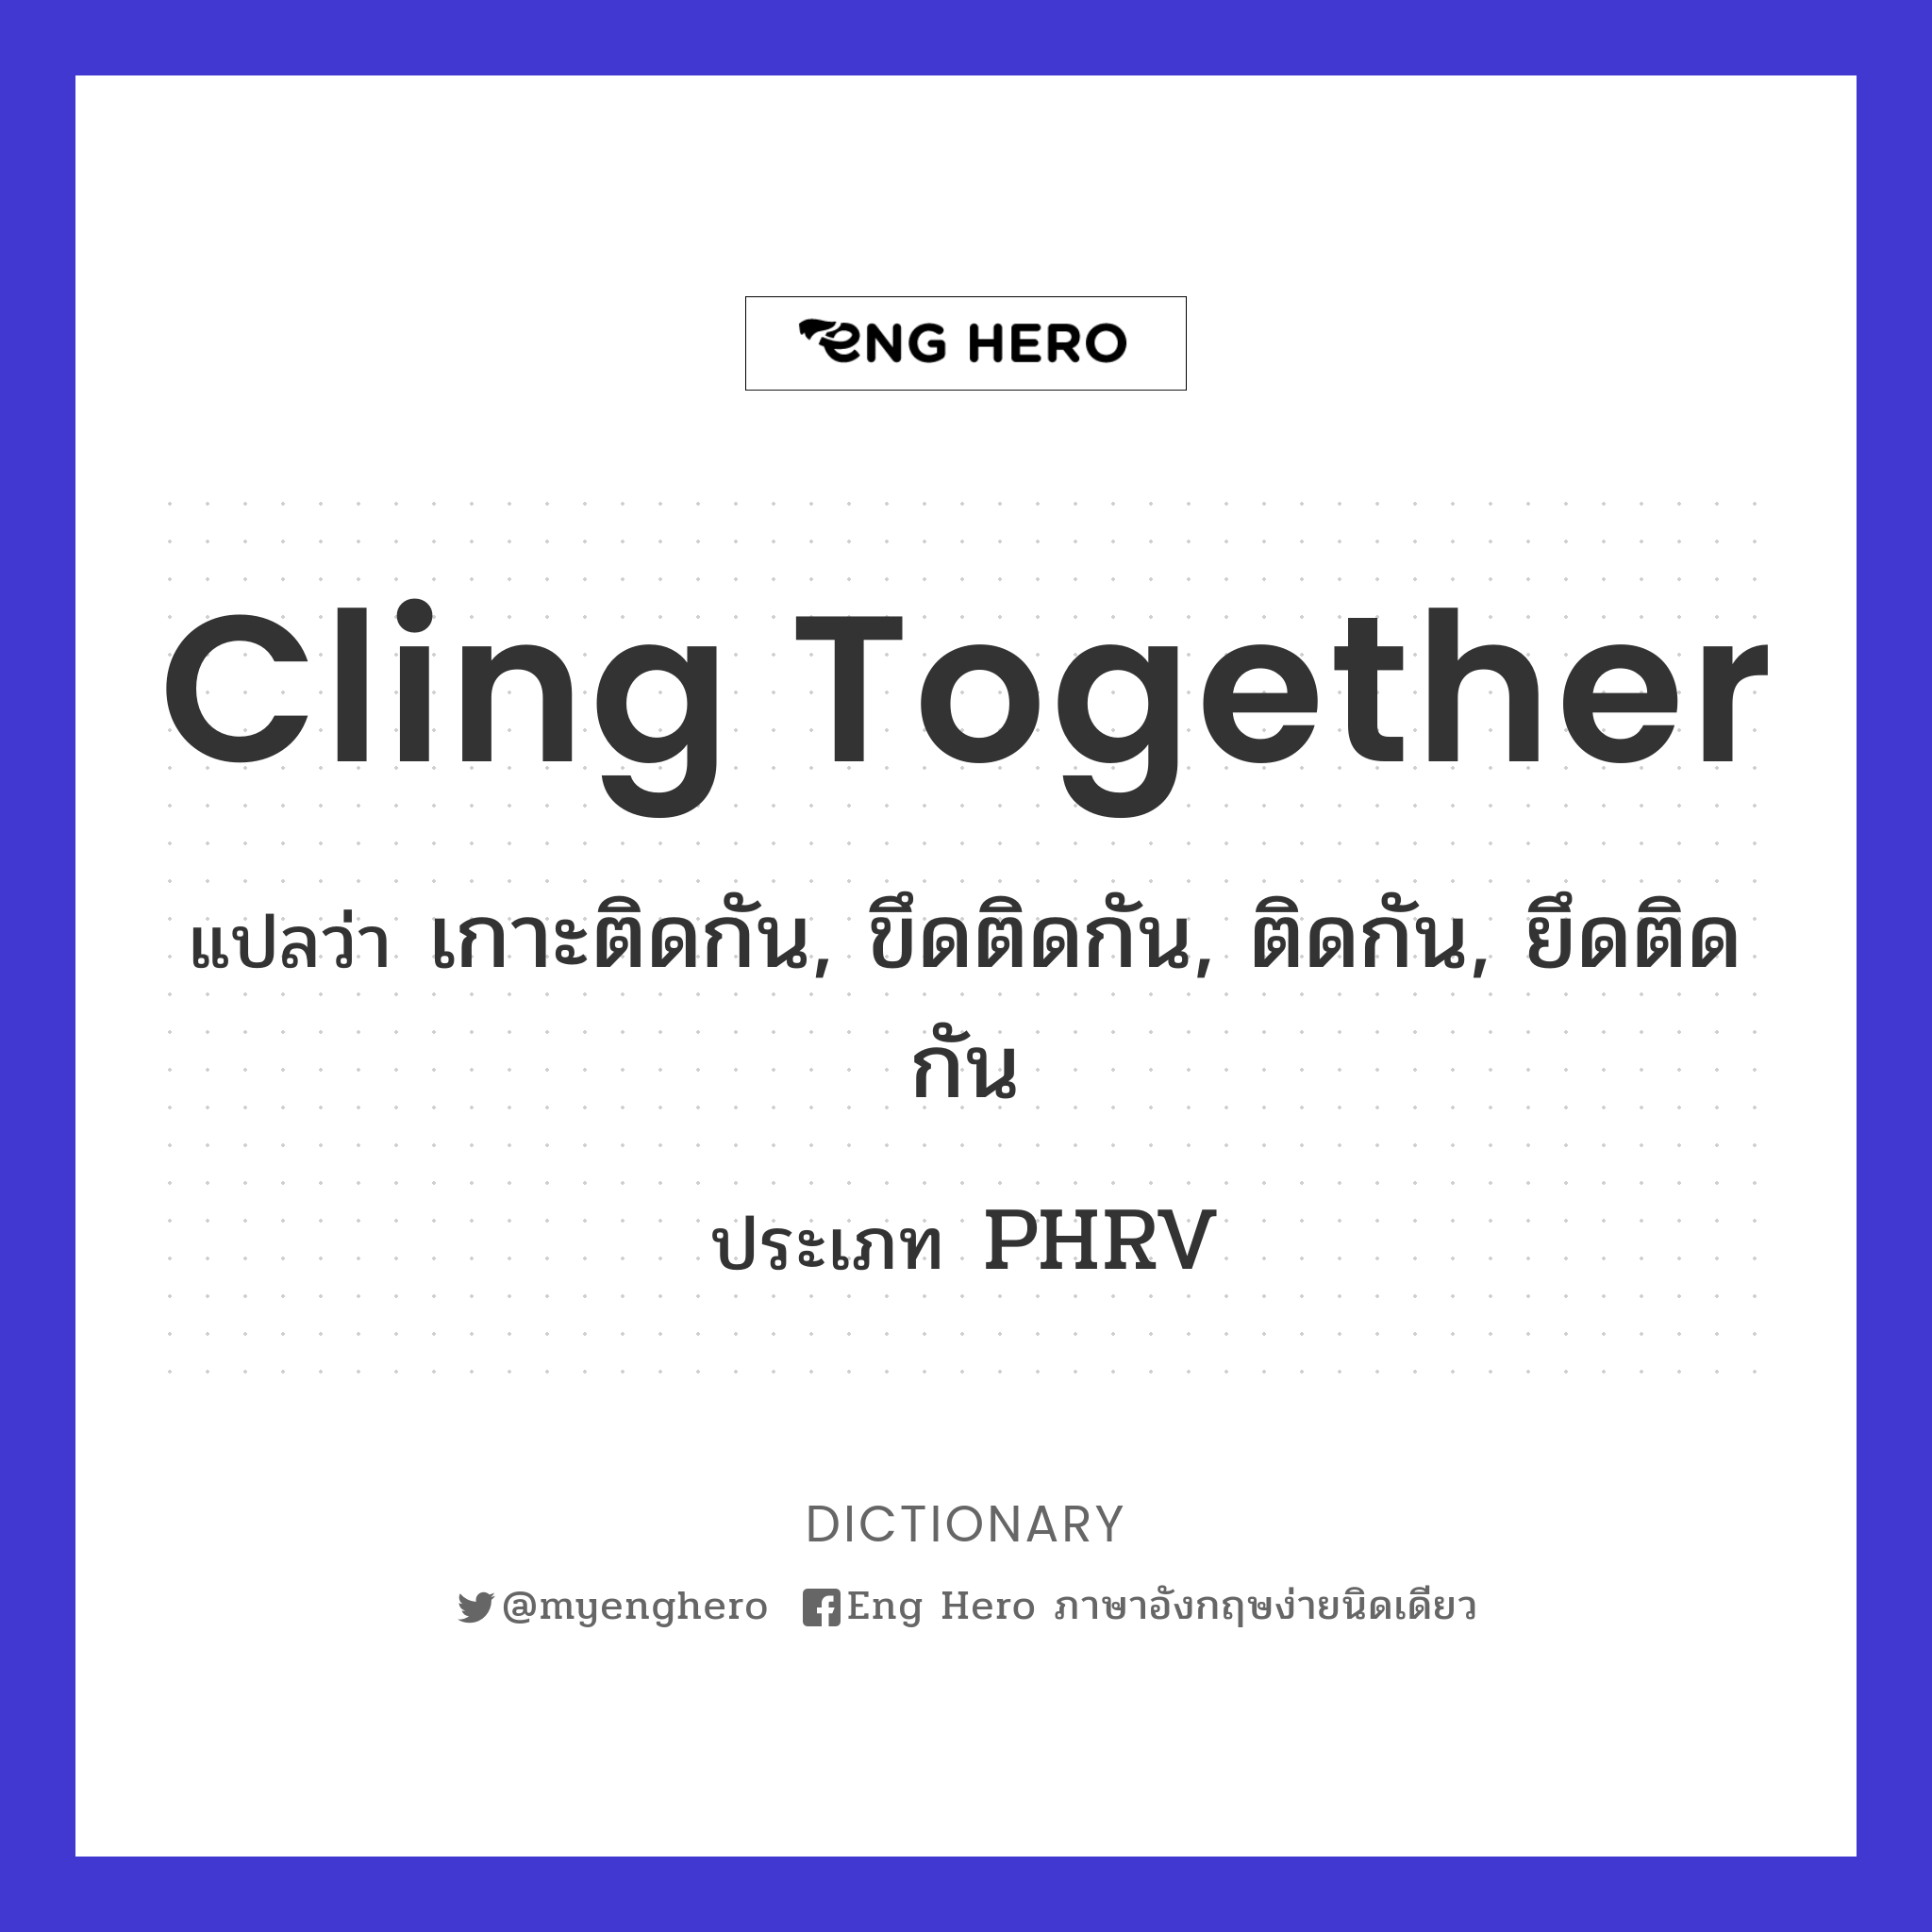 cling together